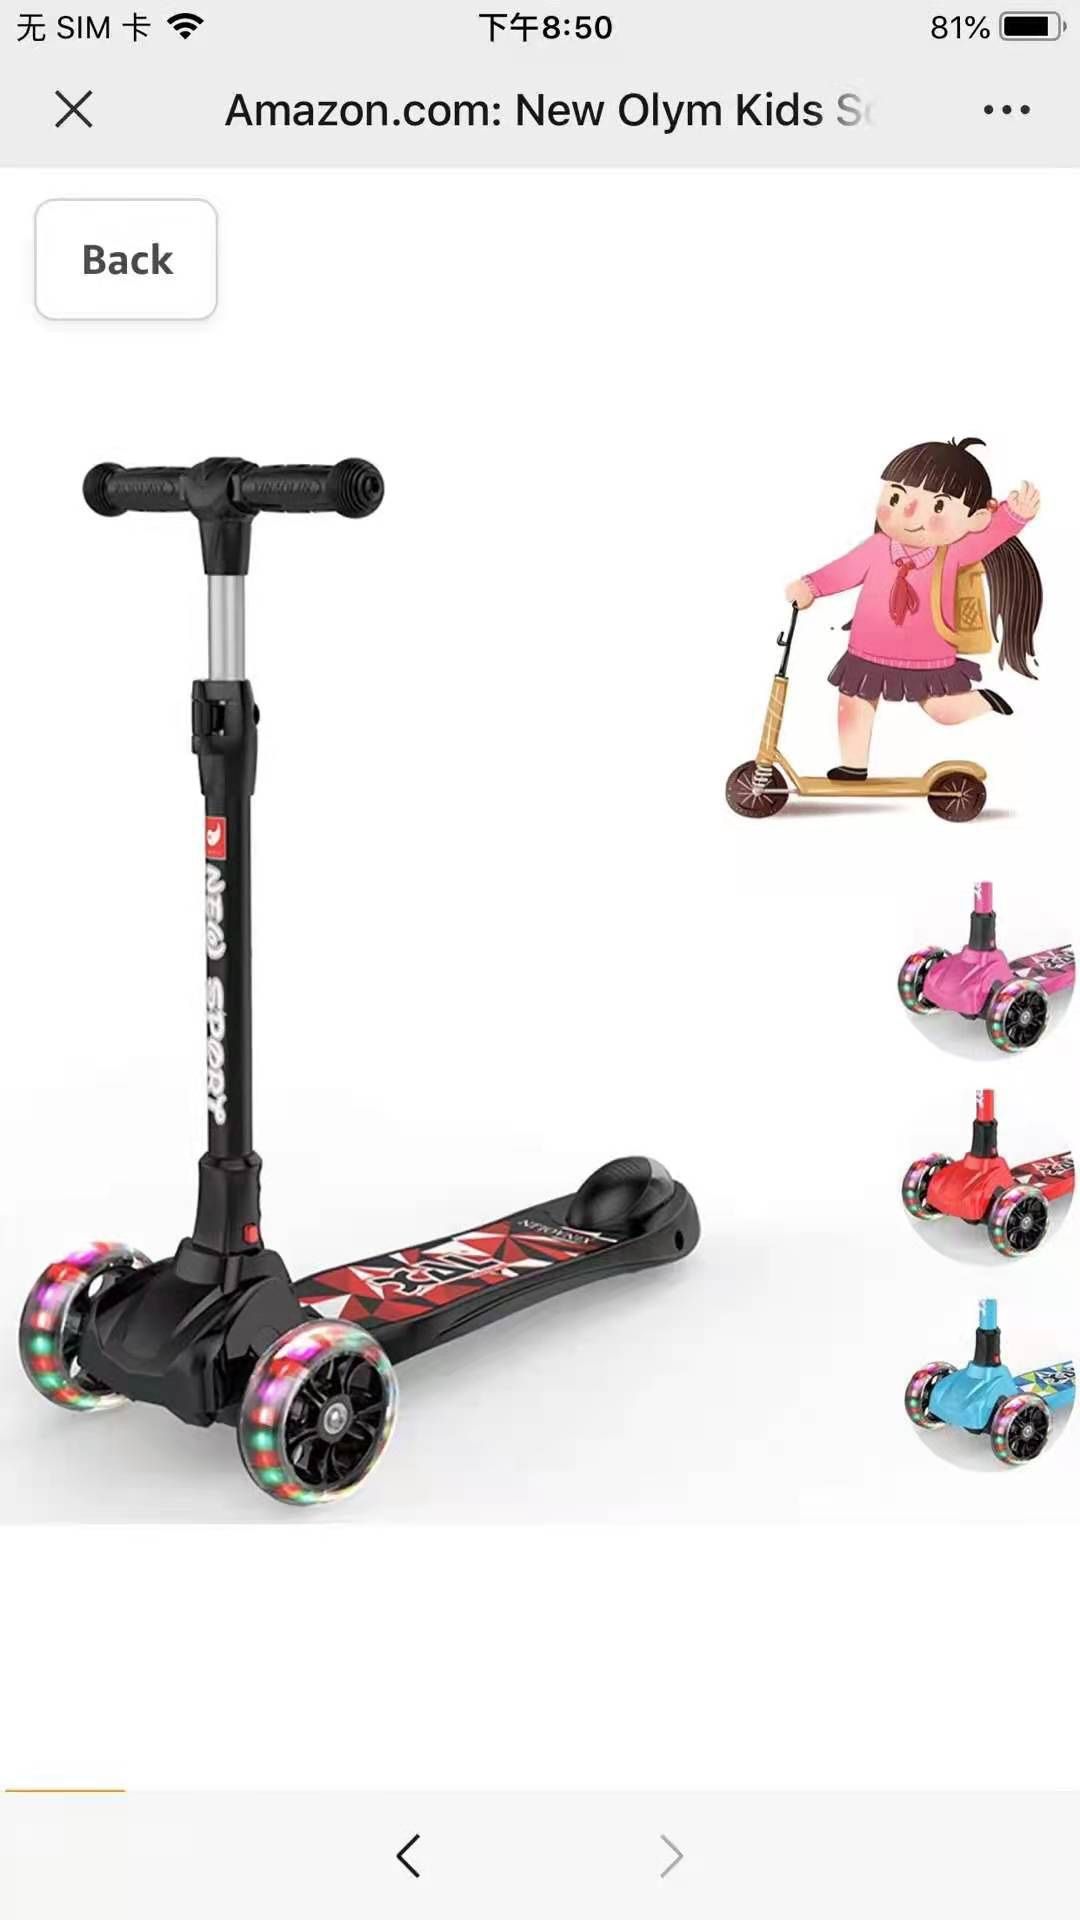 New Olym Kids Scooter for Toddlers 3 Wheel Scooter for Boy and Girls Big Flashing Wheels Adjustable Scooter with Safety Brake for Little Children Ages